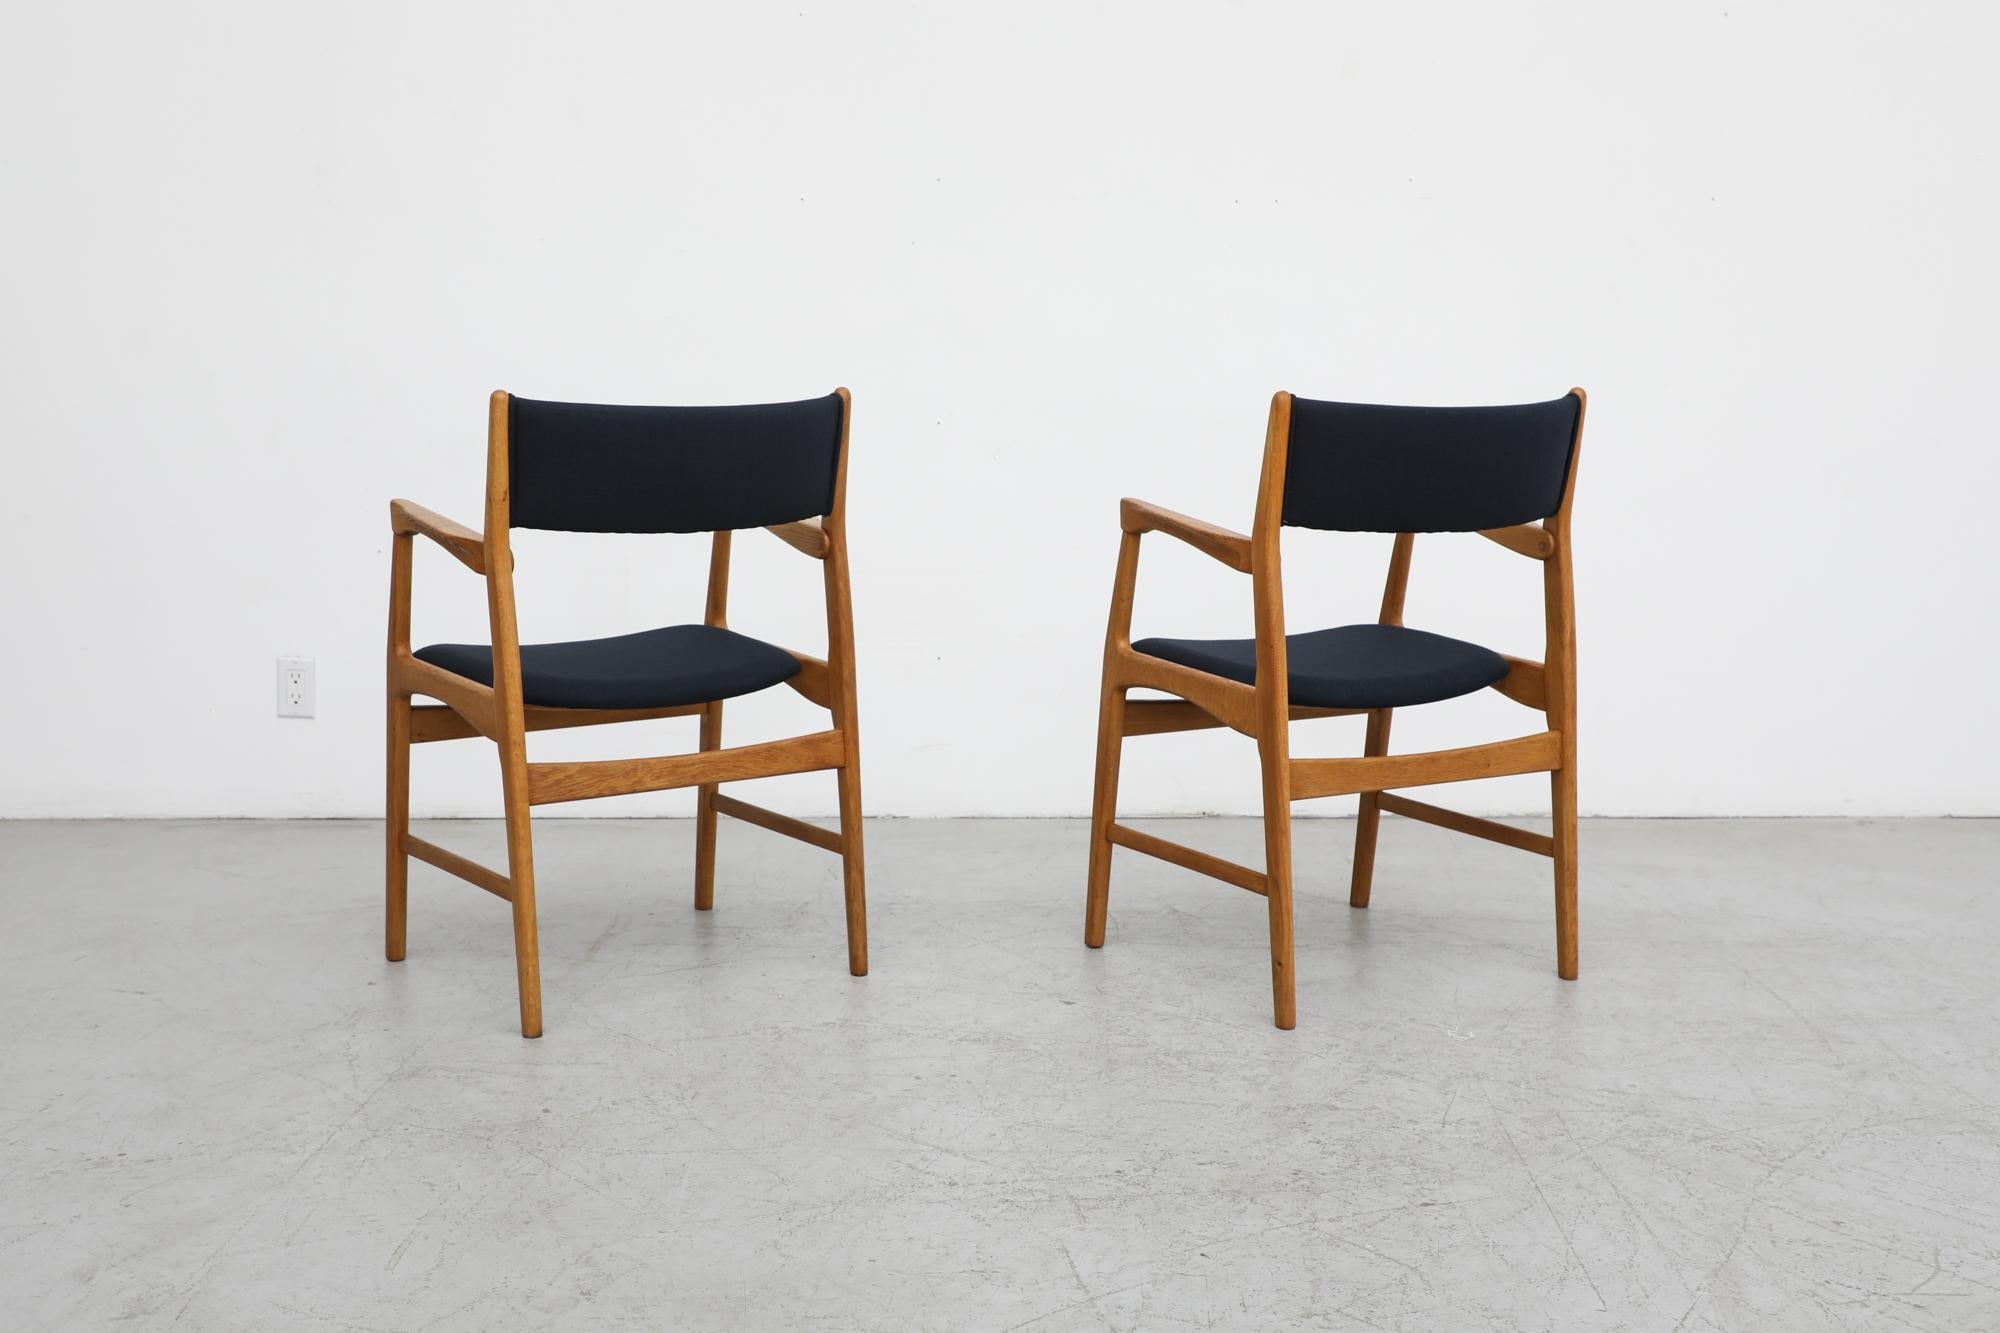 Mid-20th Century Pair of Hans Wegner Inspired Danish Solid Oak Side Chairs with Black Upholstery For Sale